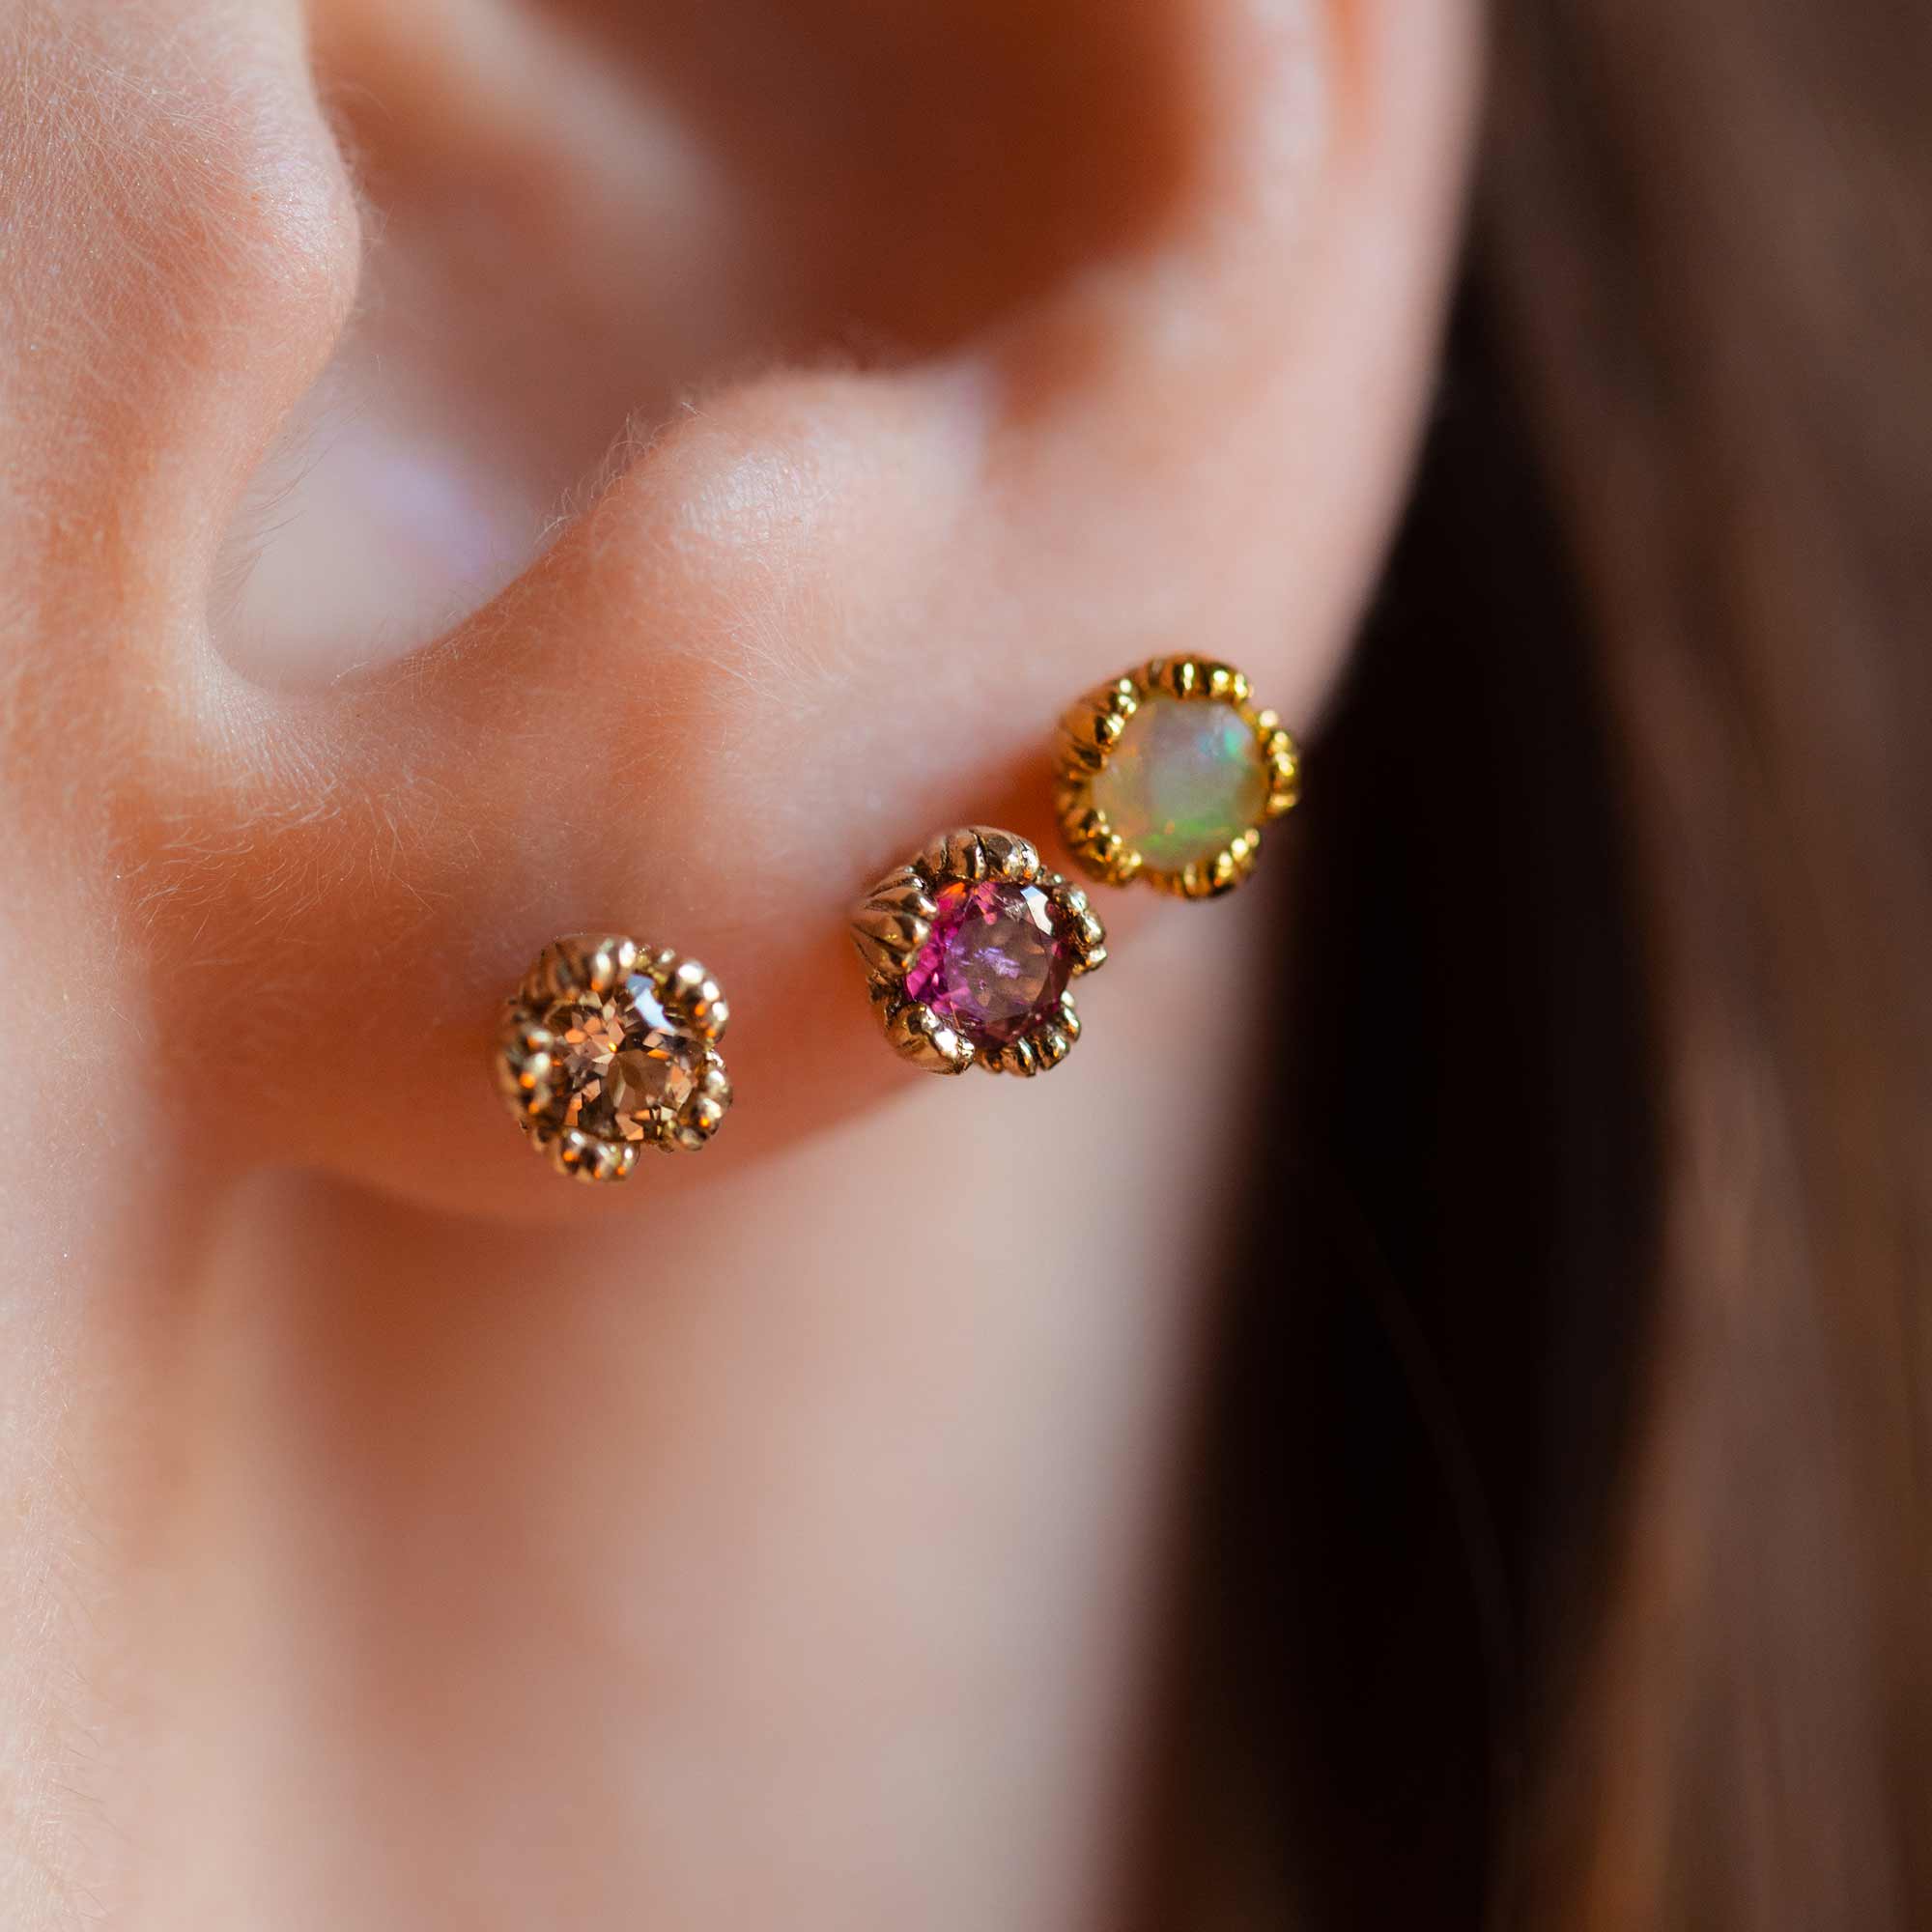 Model wears three gemstone stud earrings in one ear. Close up. Showing imperial topaz, pink sapphire and faceted opal.